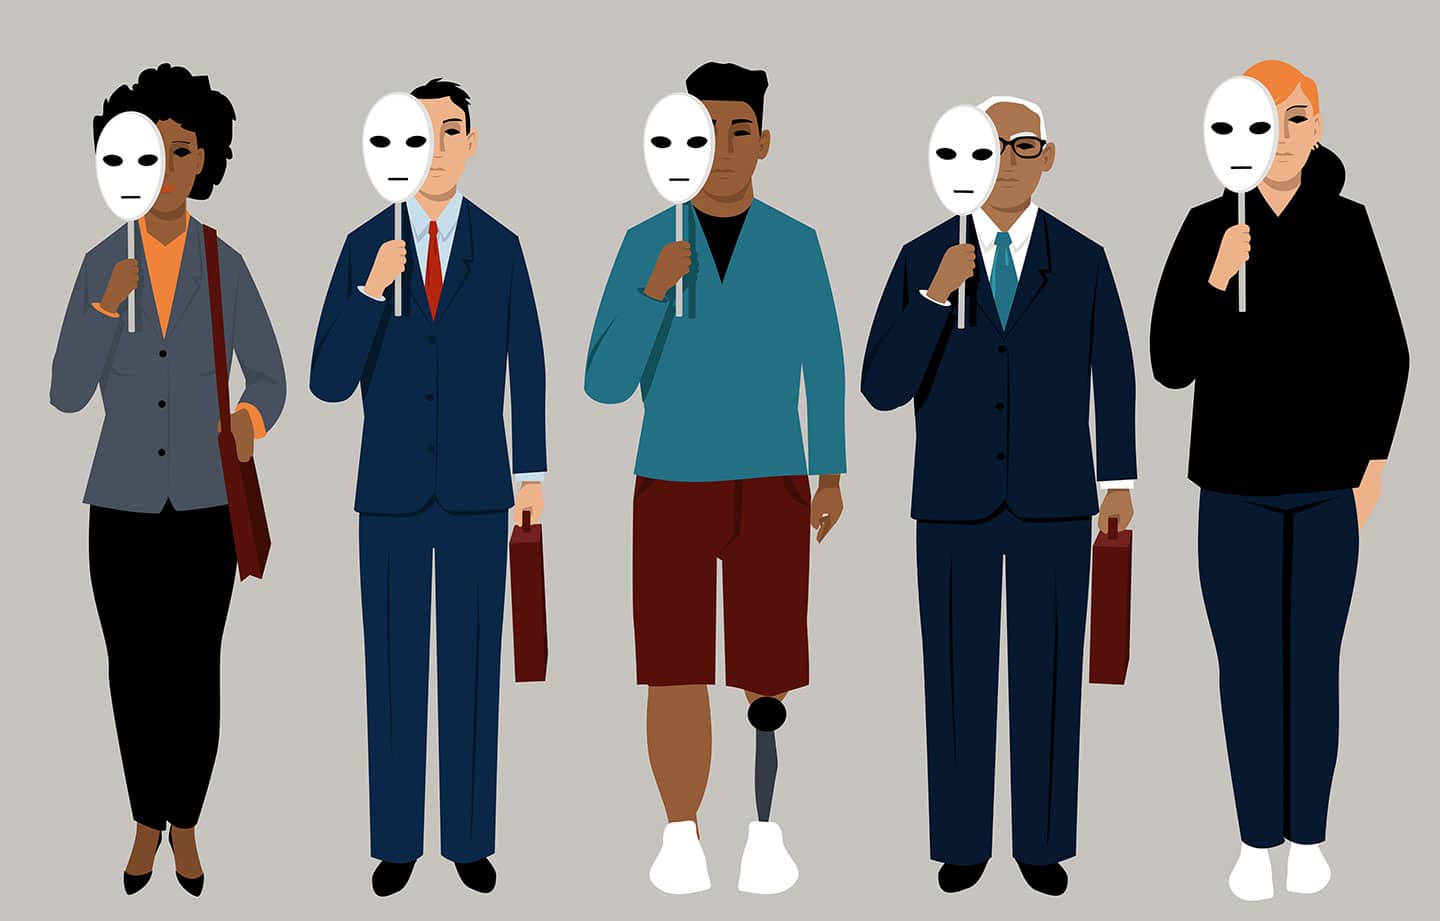 Illustration Of Different People With Masks | Civil Rights Attorneys | Gash & Associates, P.C.